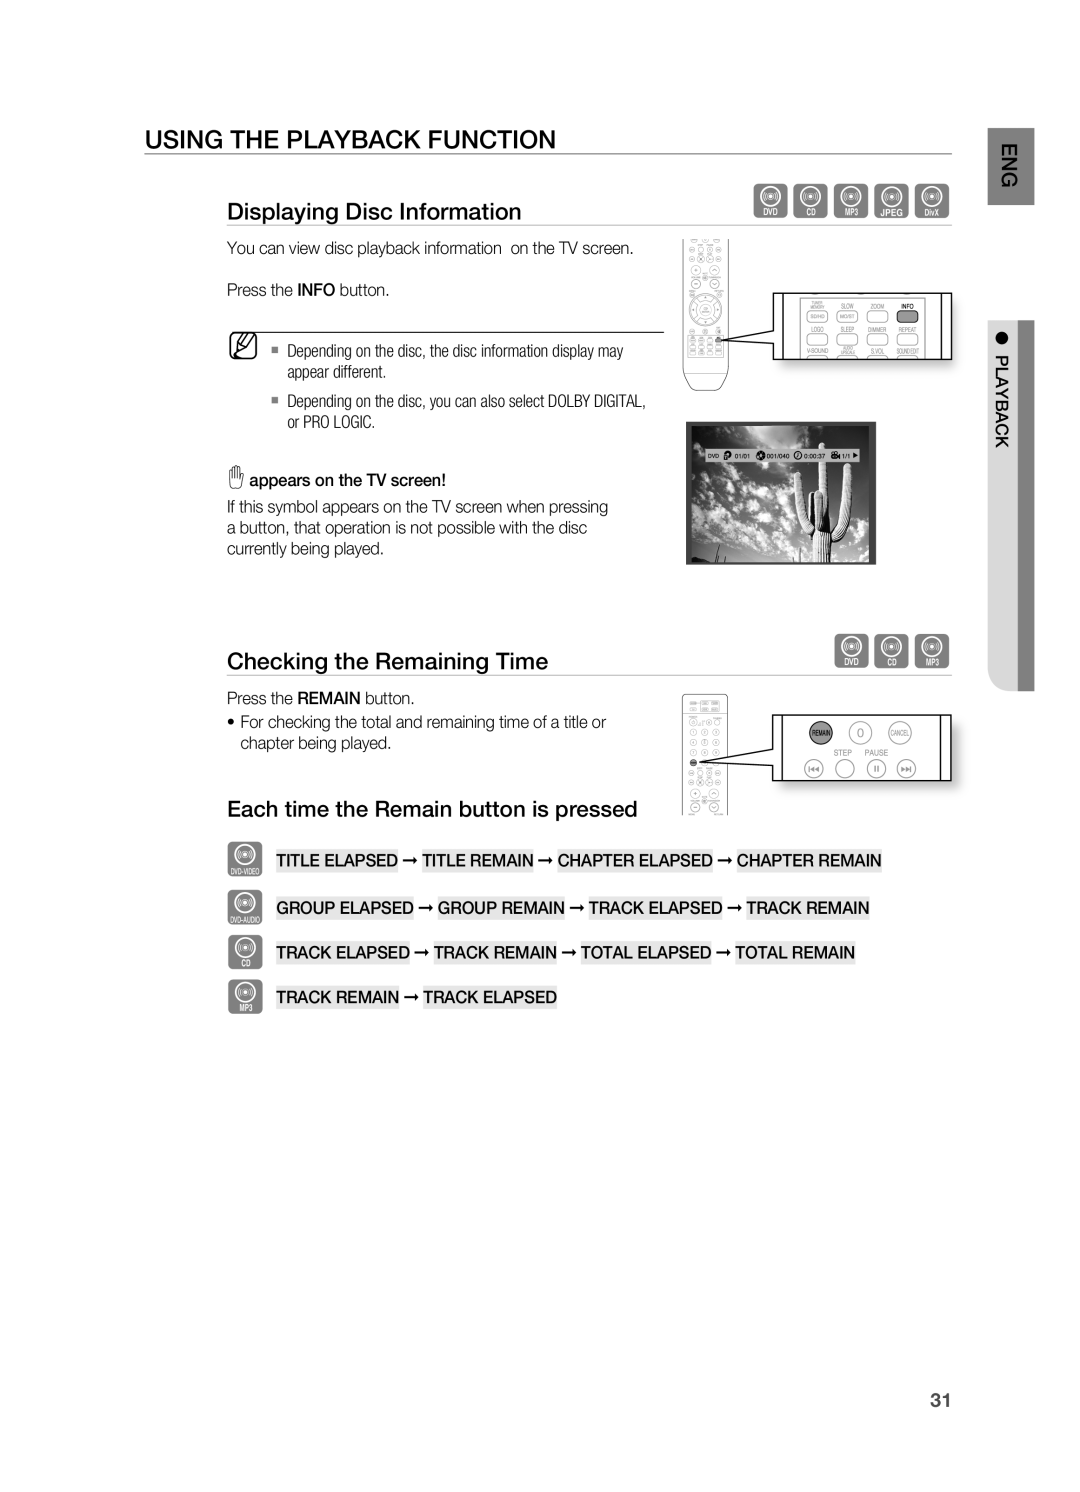 Samsung HT-X810 user manual Bagd, USING THE PlAYBACK FUNCTION, Displaying Disc Information, Checking the remaining Time 